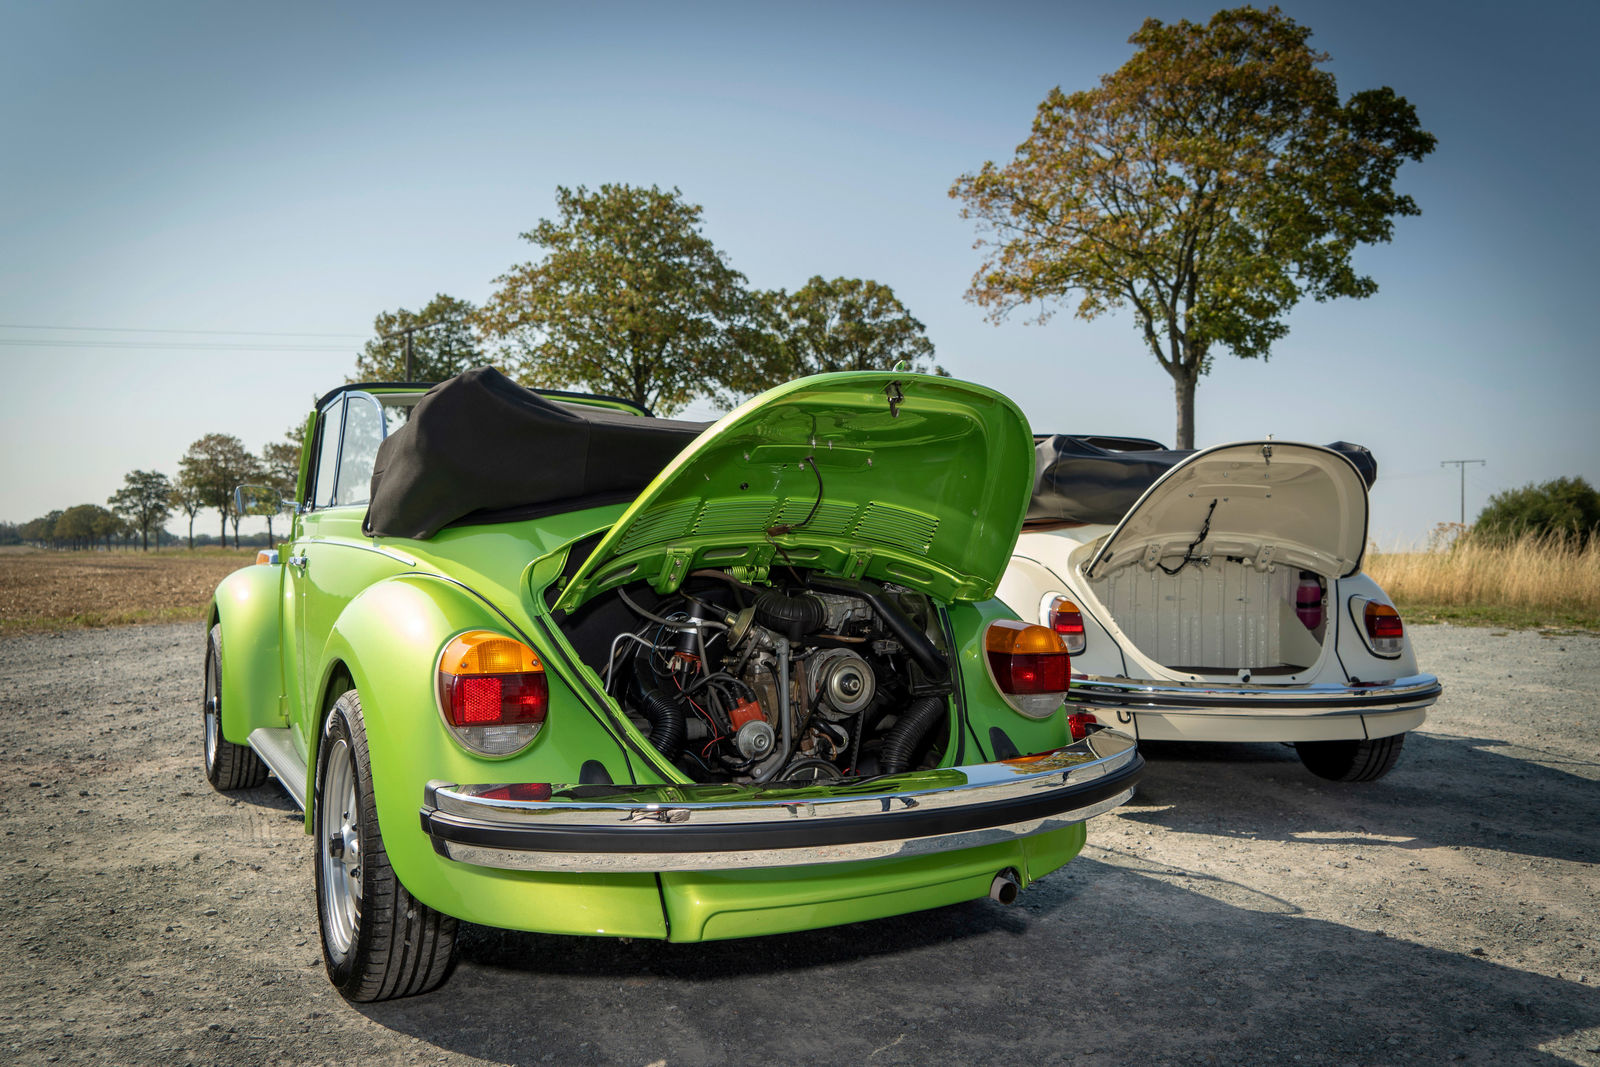 The e-Beetle is providing an additional trunk, where the classic Beetle has its boxer engine